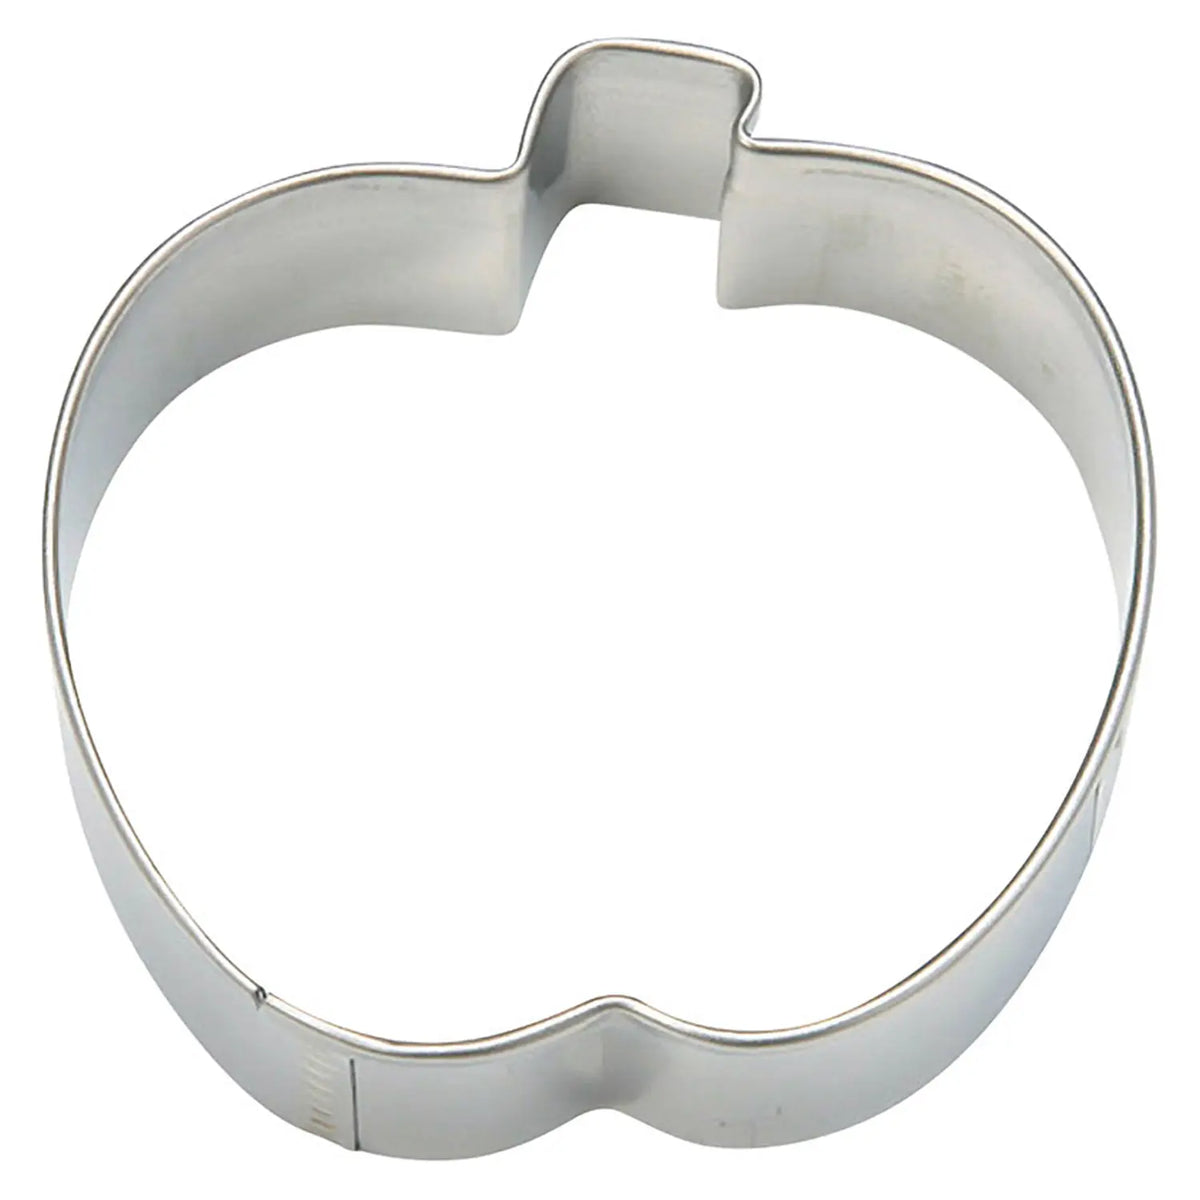 TIGERCROWN Cake Land Stainless Steel Cookie Cutter Apple